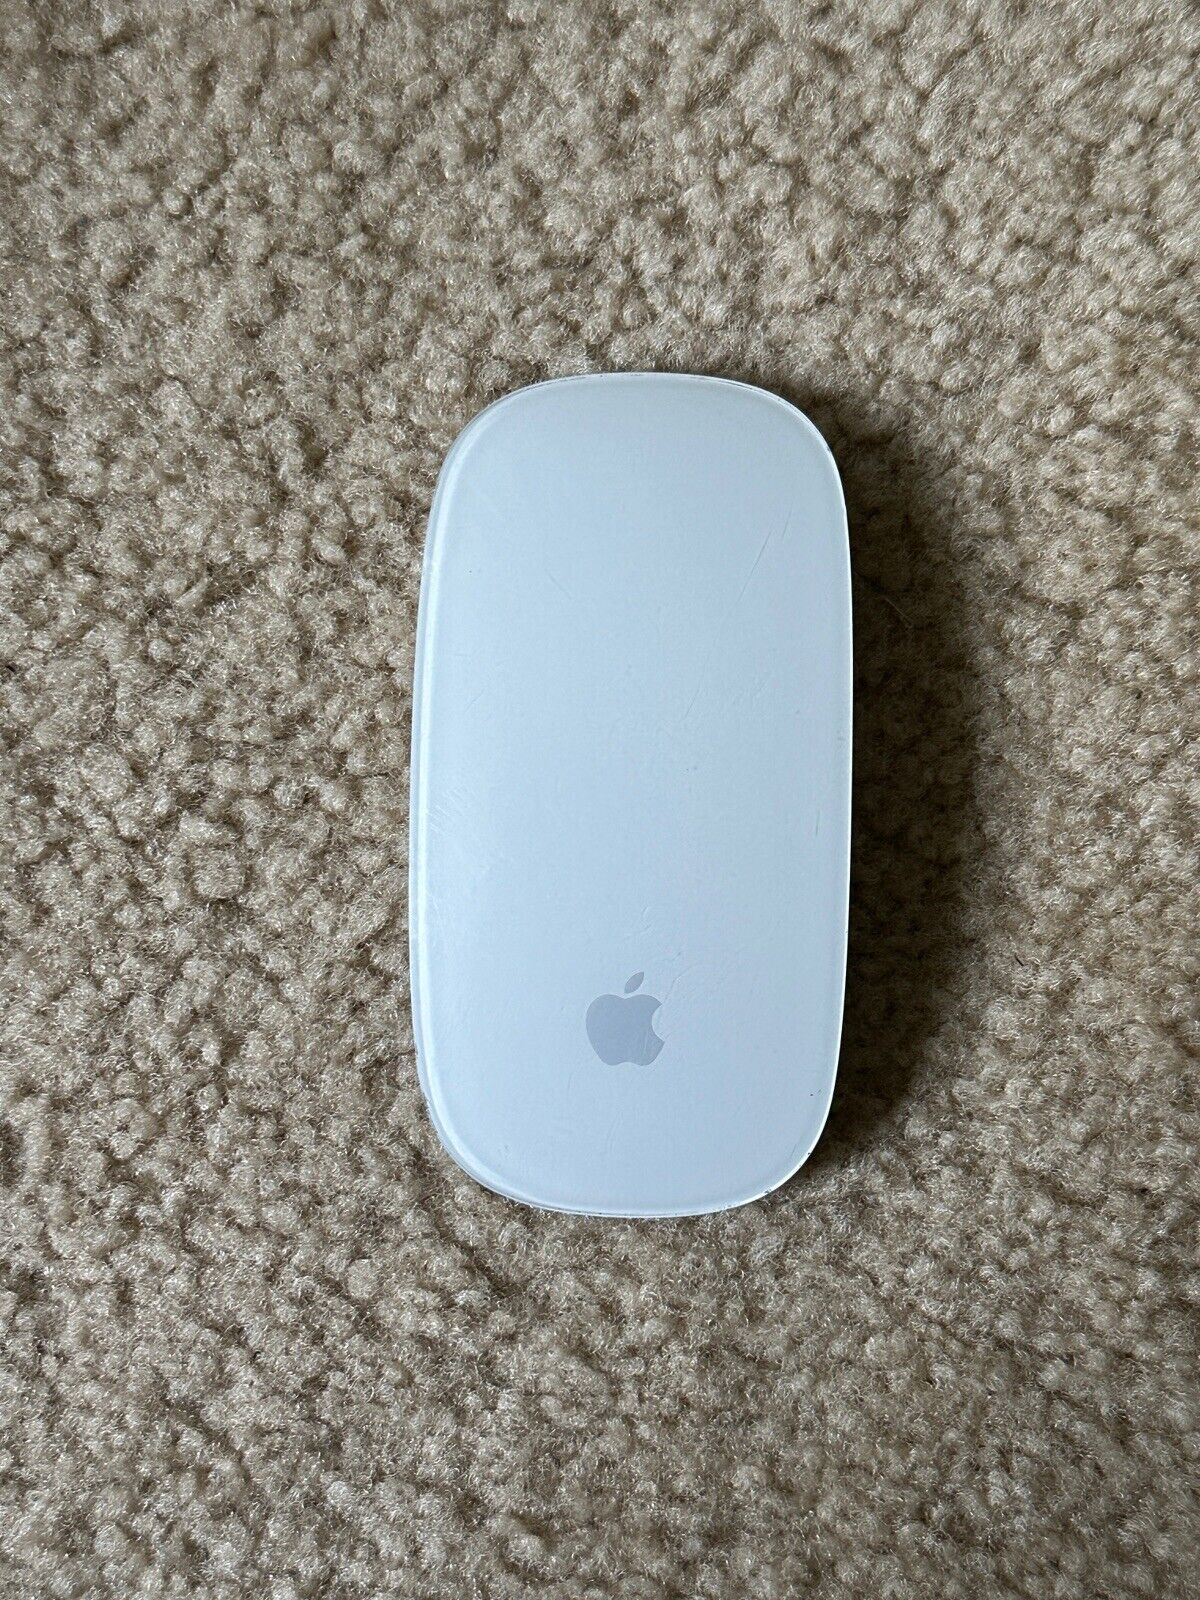 Apple Magic Bluetooth Wireless Mouse A1296 MB829LL/A White